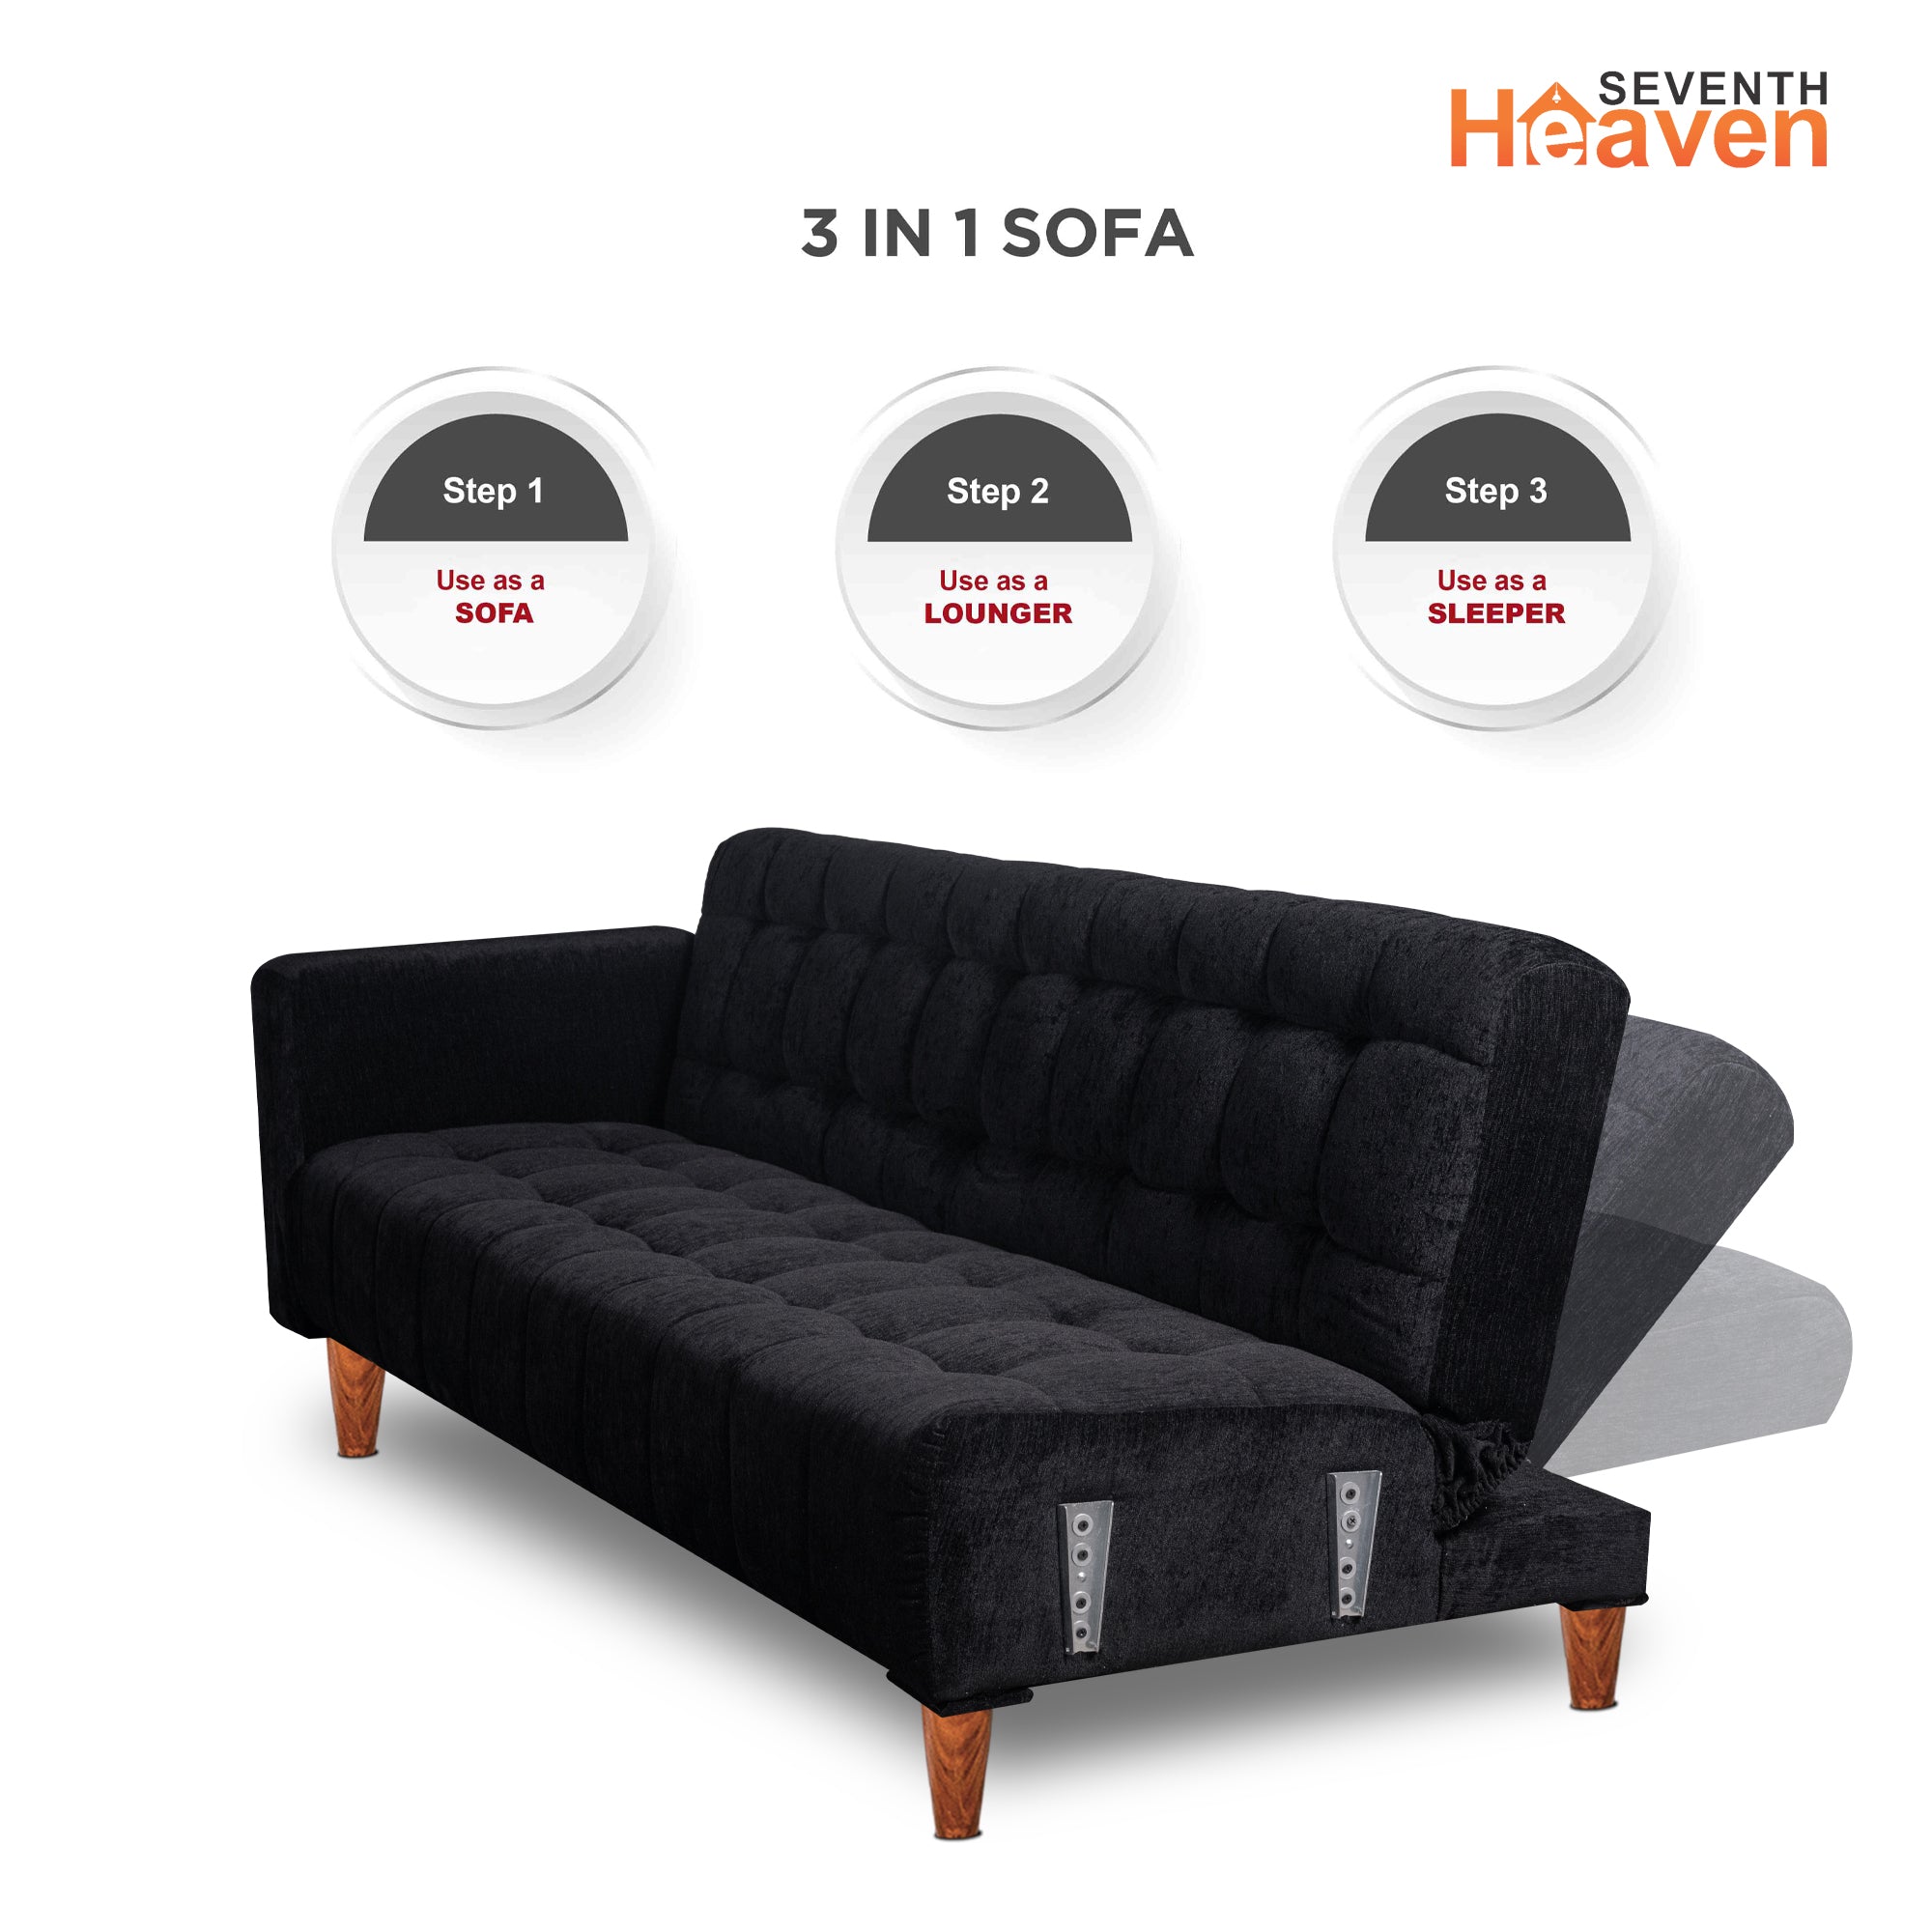 Seventh Heaven 4 Seater Wooden Sofa cum Bed, Chenille Molfino Fabric 72x36x16: 3 Year Warranty 4 Seater Single Solid Wood Pull Out Sofa Cum Bed  (Finish Color - Black Delivery Condition - DIY(Do-It-Yourself))